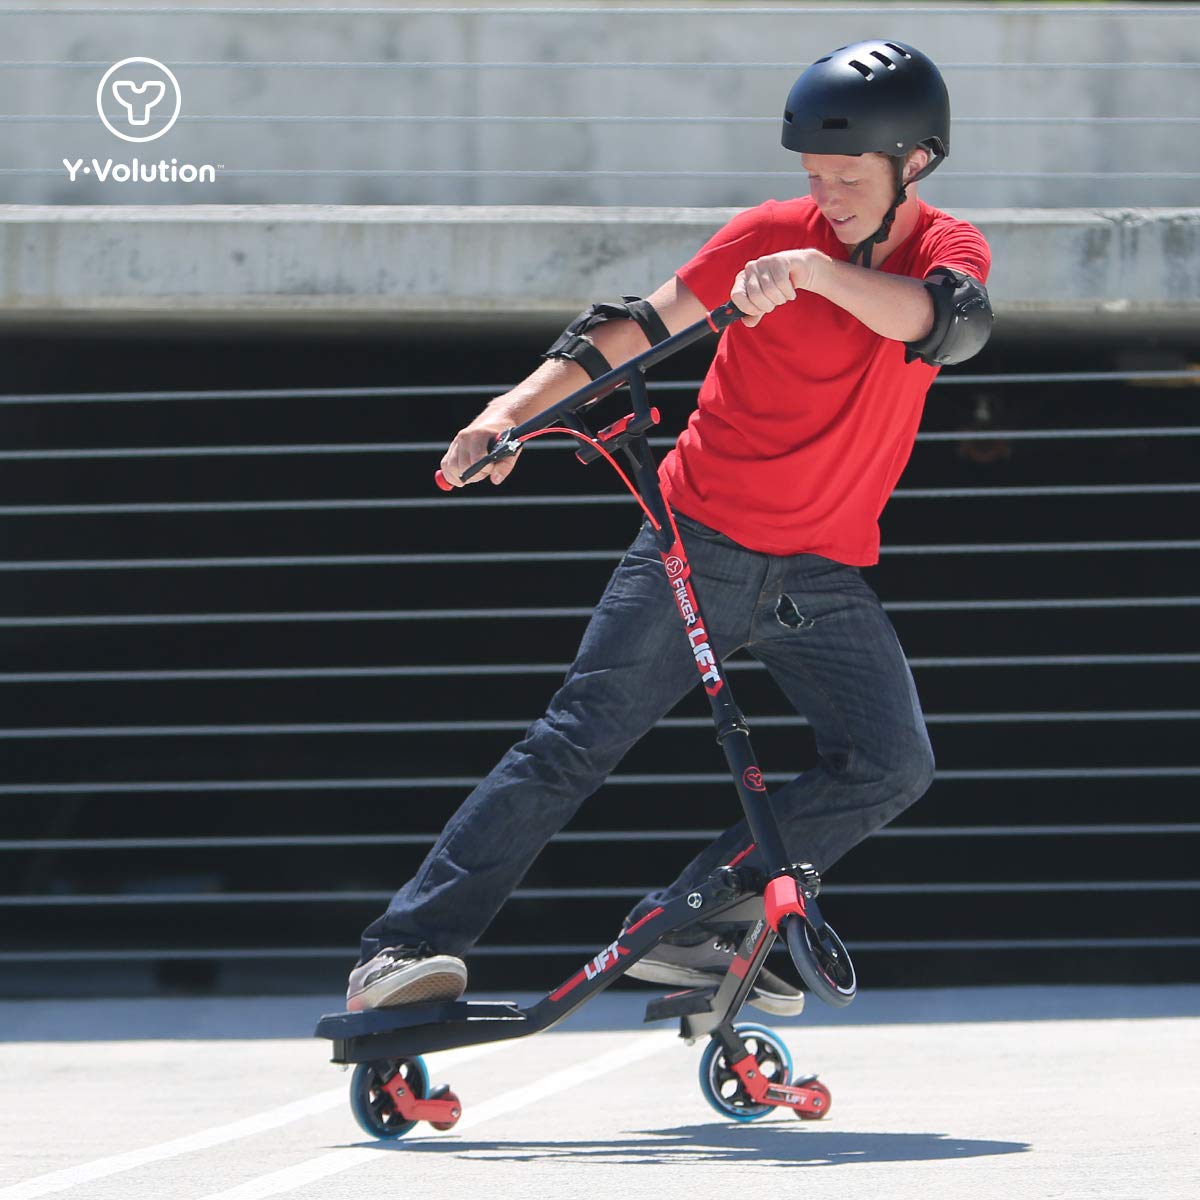 Yvolution Y Fliker Lift | Swing Wiggle Carving Scooter for Kids Age 7+ (Red 2020)